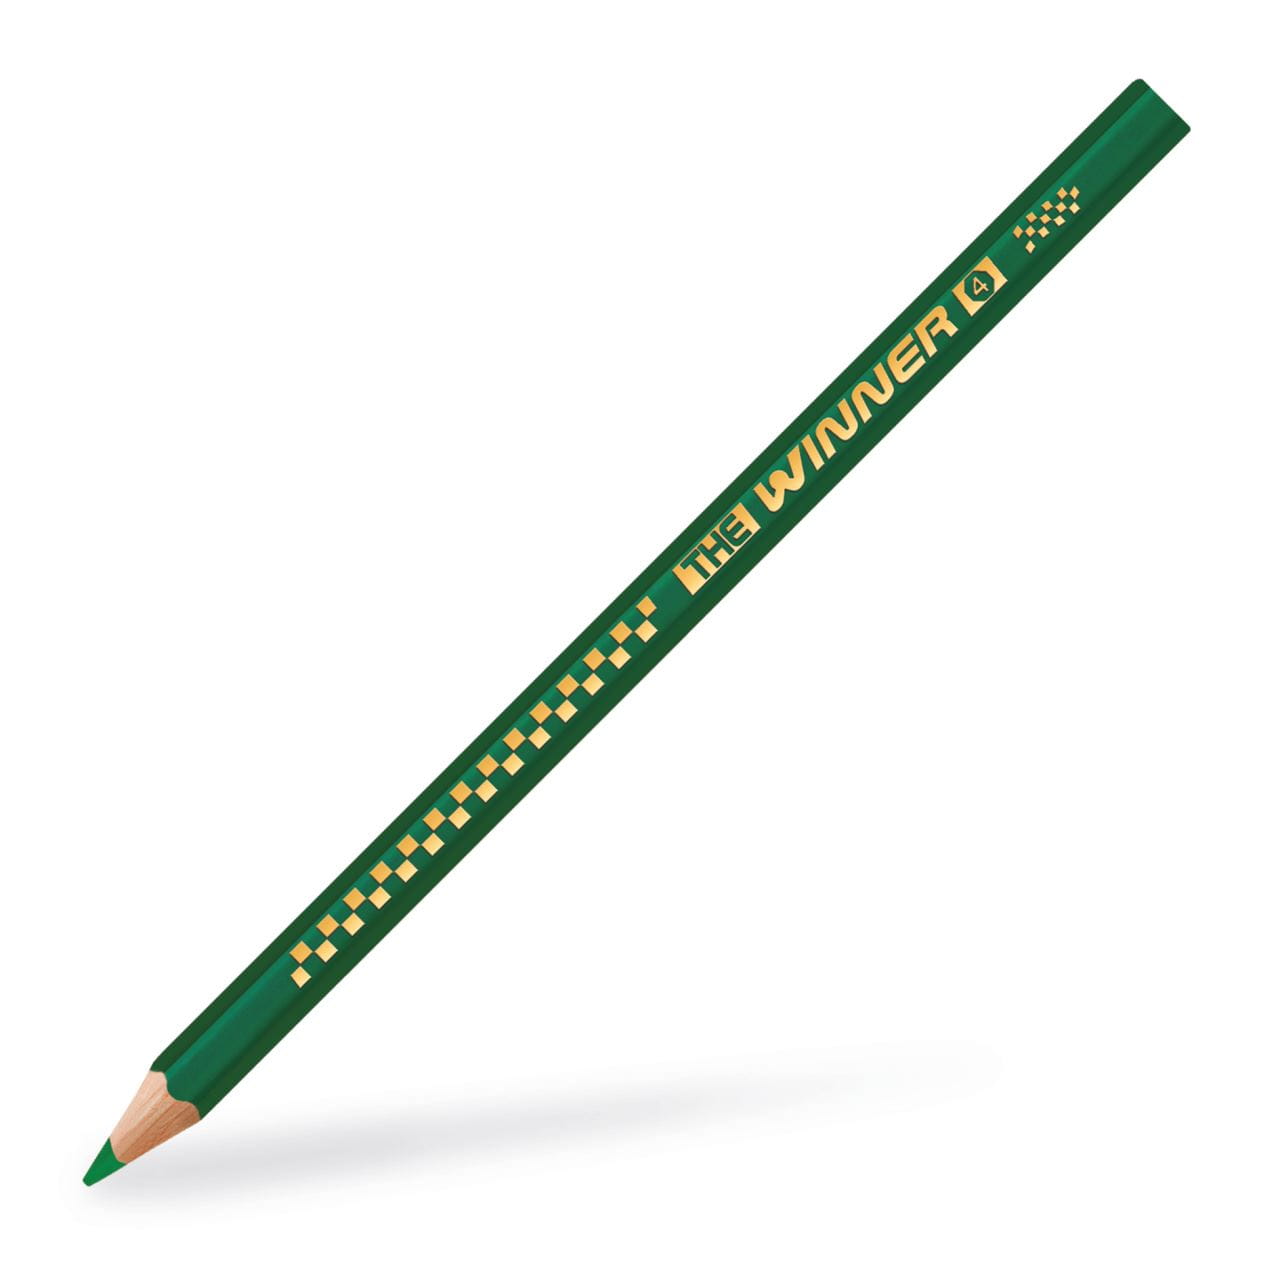 Eberhard-Faber - THE Winner coloured pencil permanent green olive